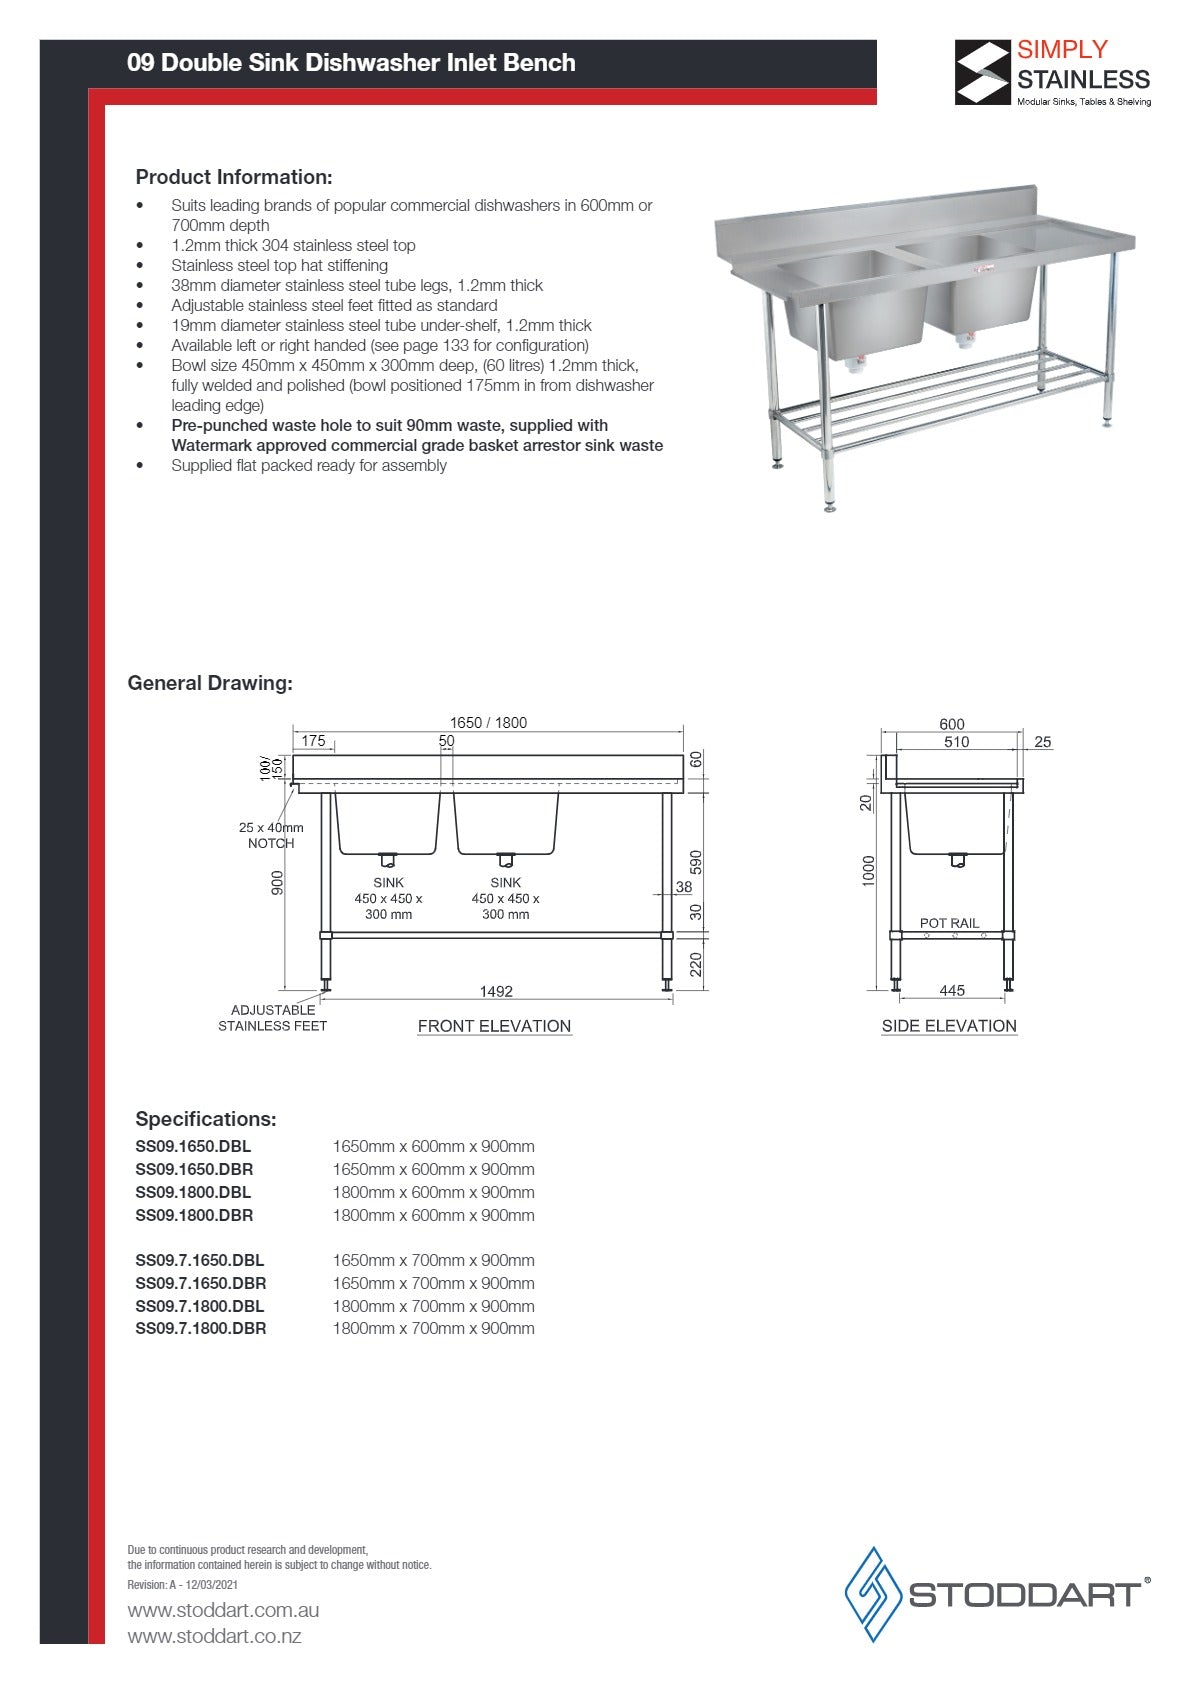 Thumbnail - Simply Stainless SS09.7.1650DBR - Double Sink Dishwasher Inlet Bench